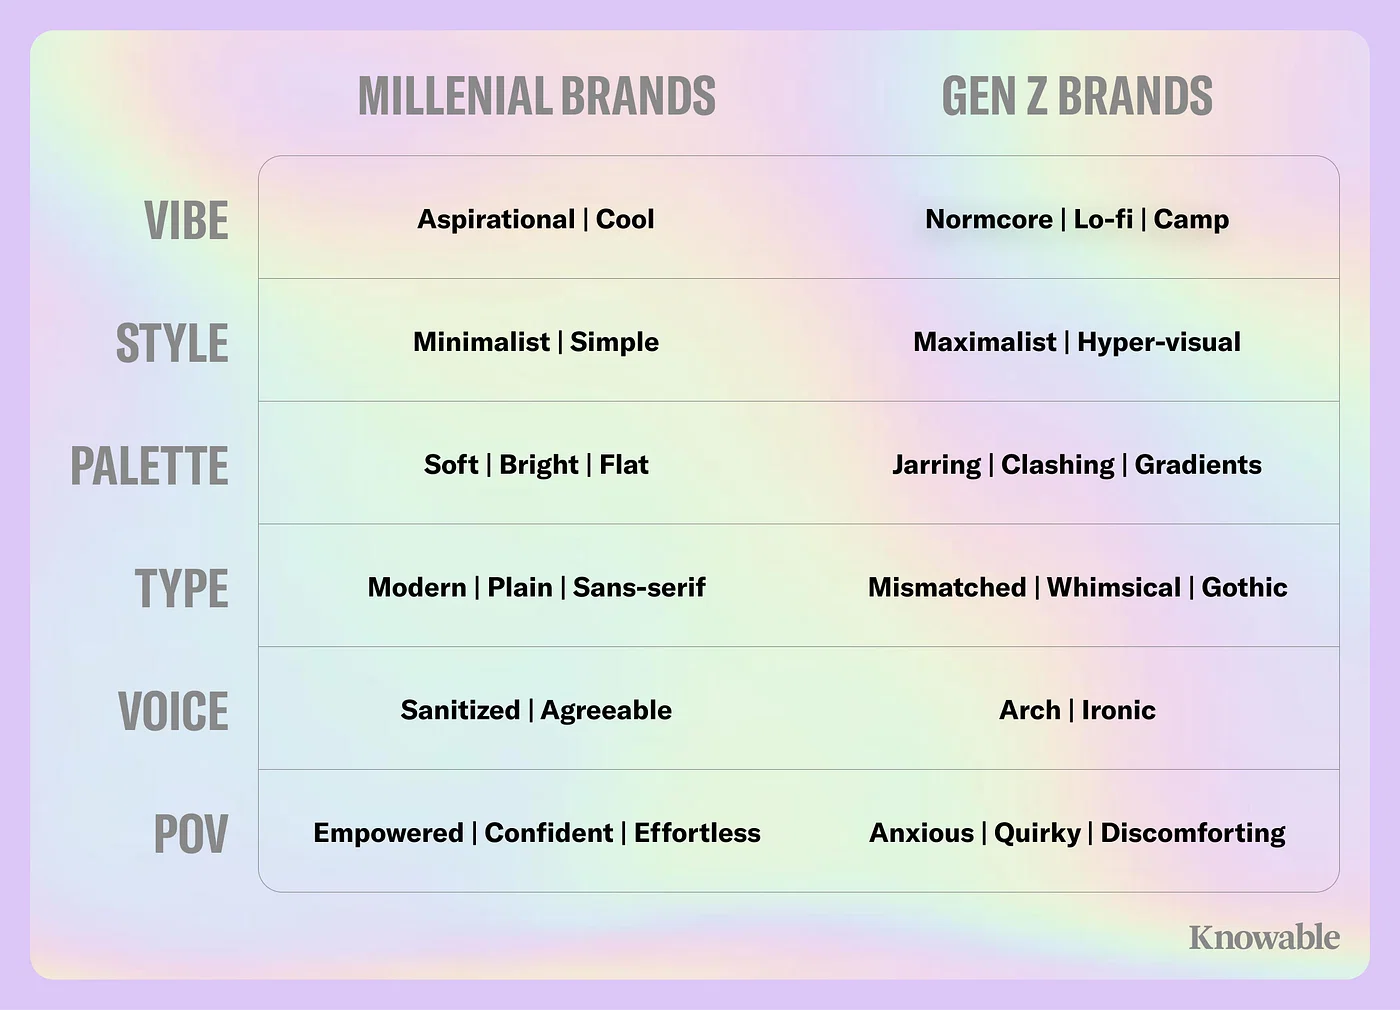 Chart assessing Millennial vs. Gen Z brands based on parameters like vibe, style, palette, type, voice, point of view. 